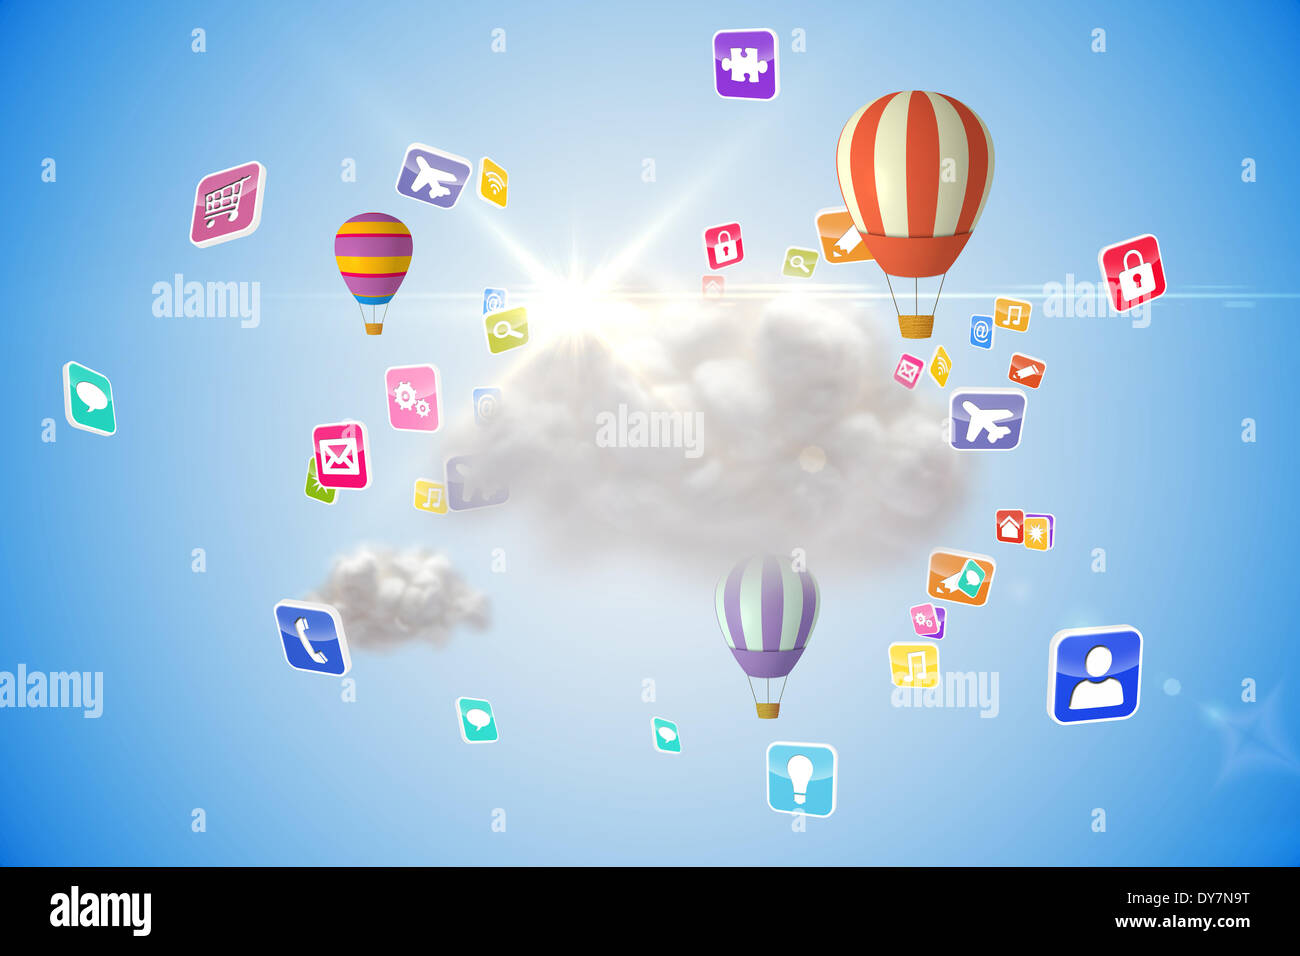 Cloud computing graphic with hot air balloons Stock Photo